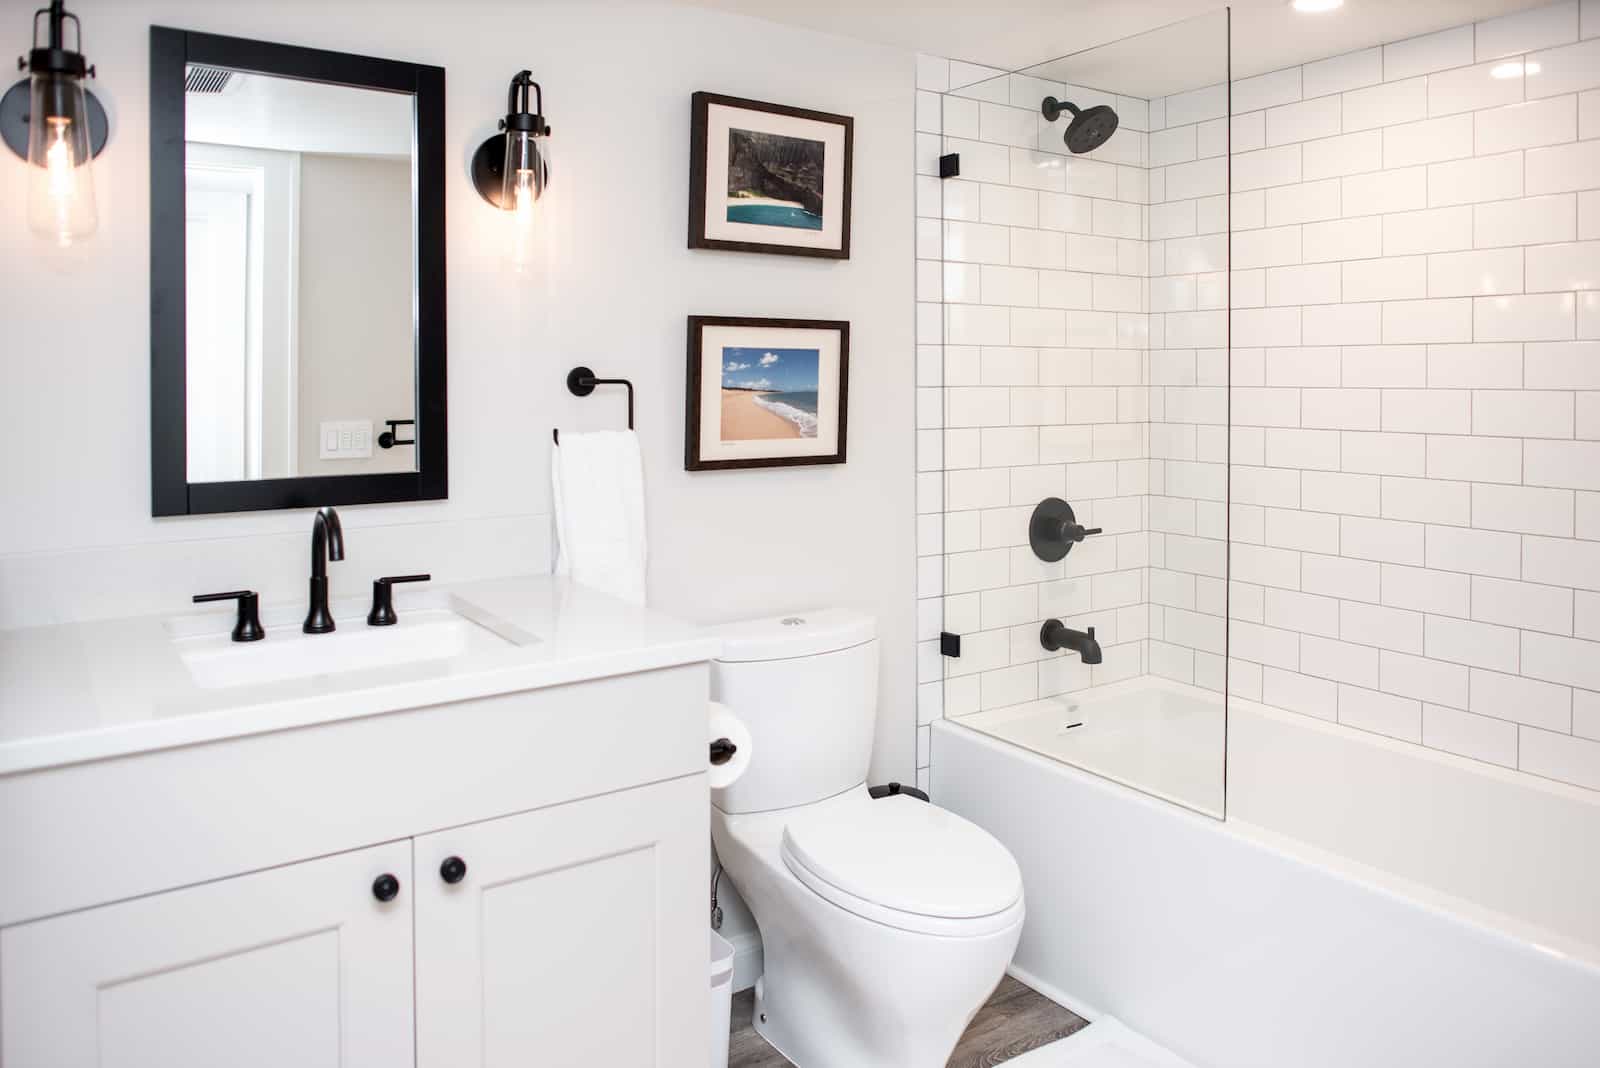 Are Permits Required For A Bathroom Remodel In Seattle - What Permits Do I Need To Remodel My Bathroom